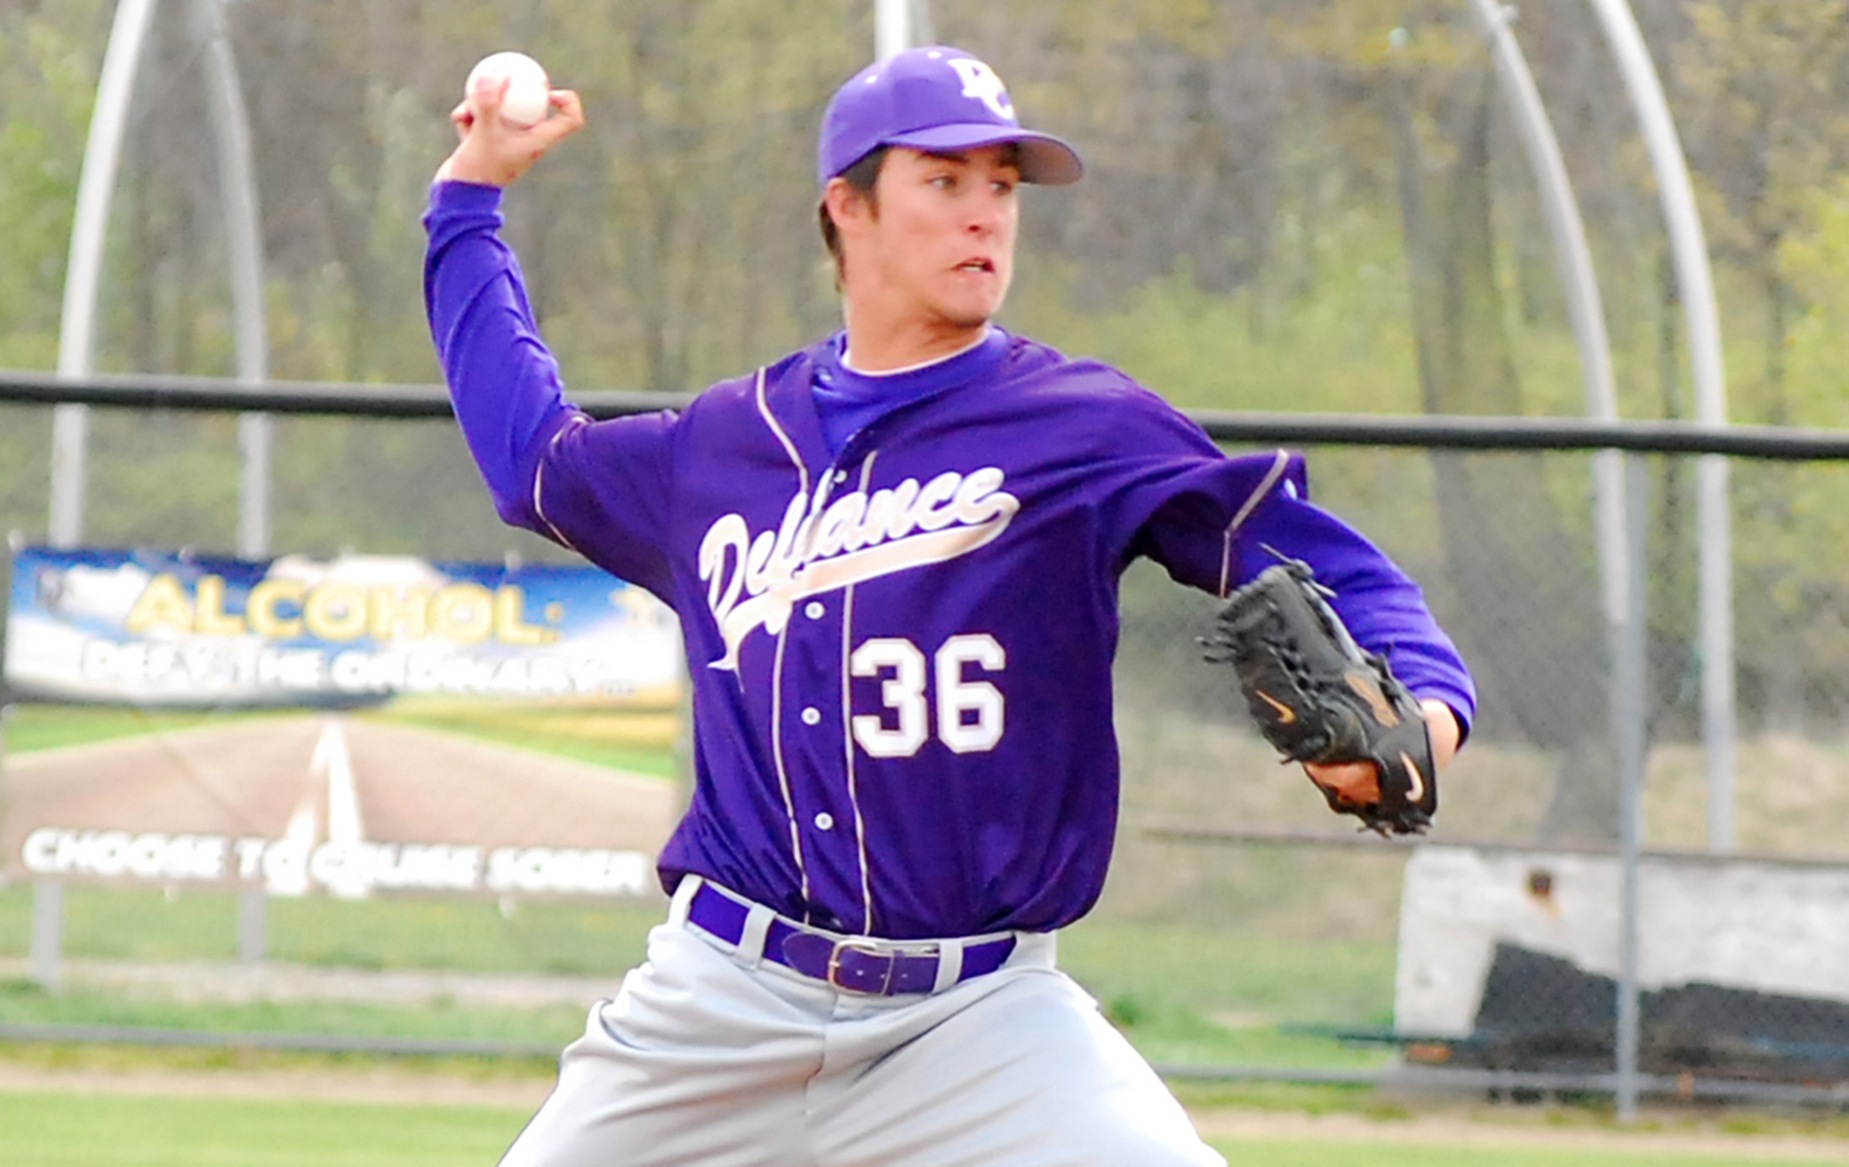 HCAC Recognizes DC’s Taylor as Pitcher of the Week